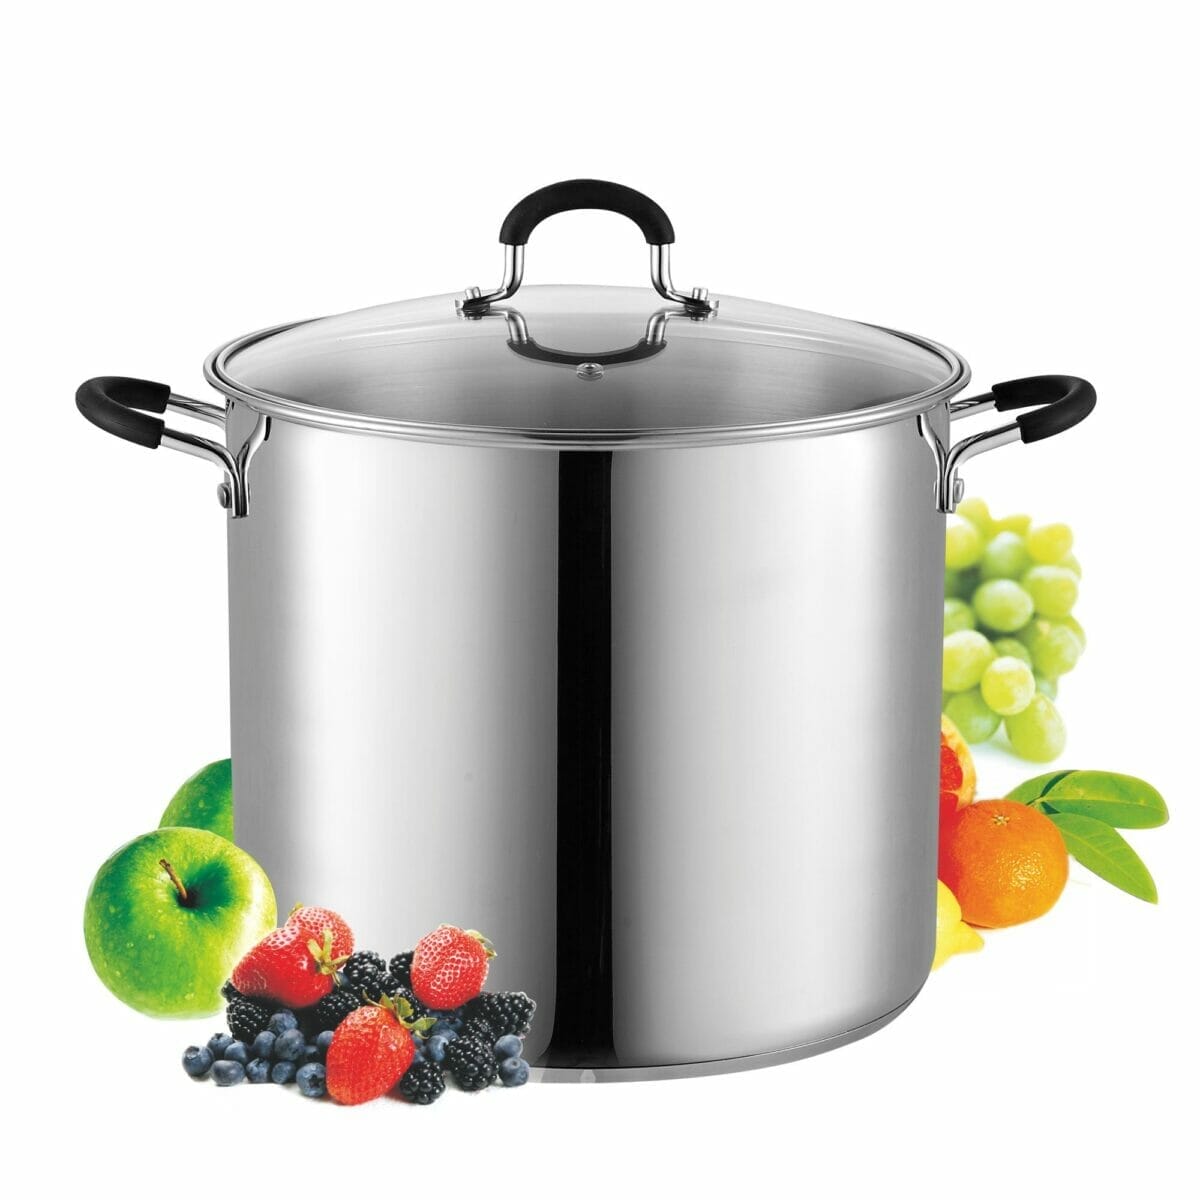 Cook N Home 12-Quart Stainless Steel Stockpot With Lid